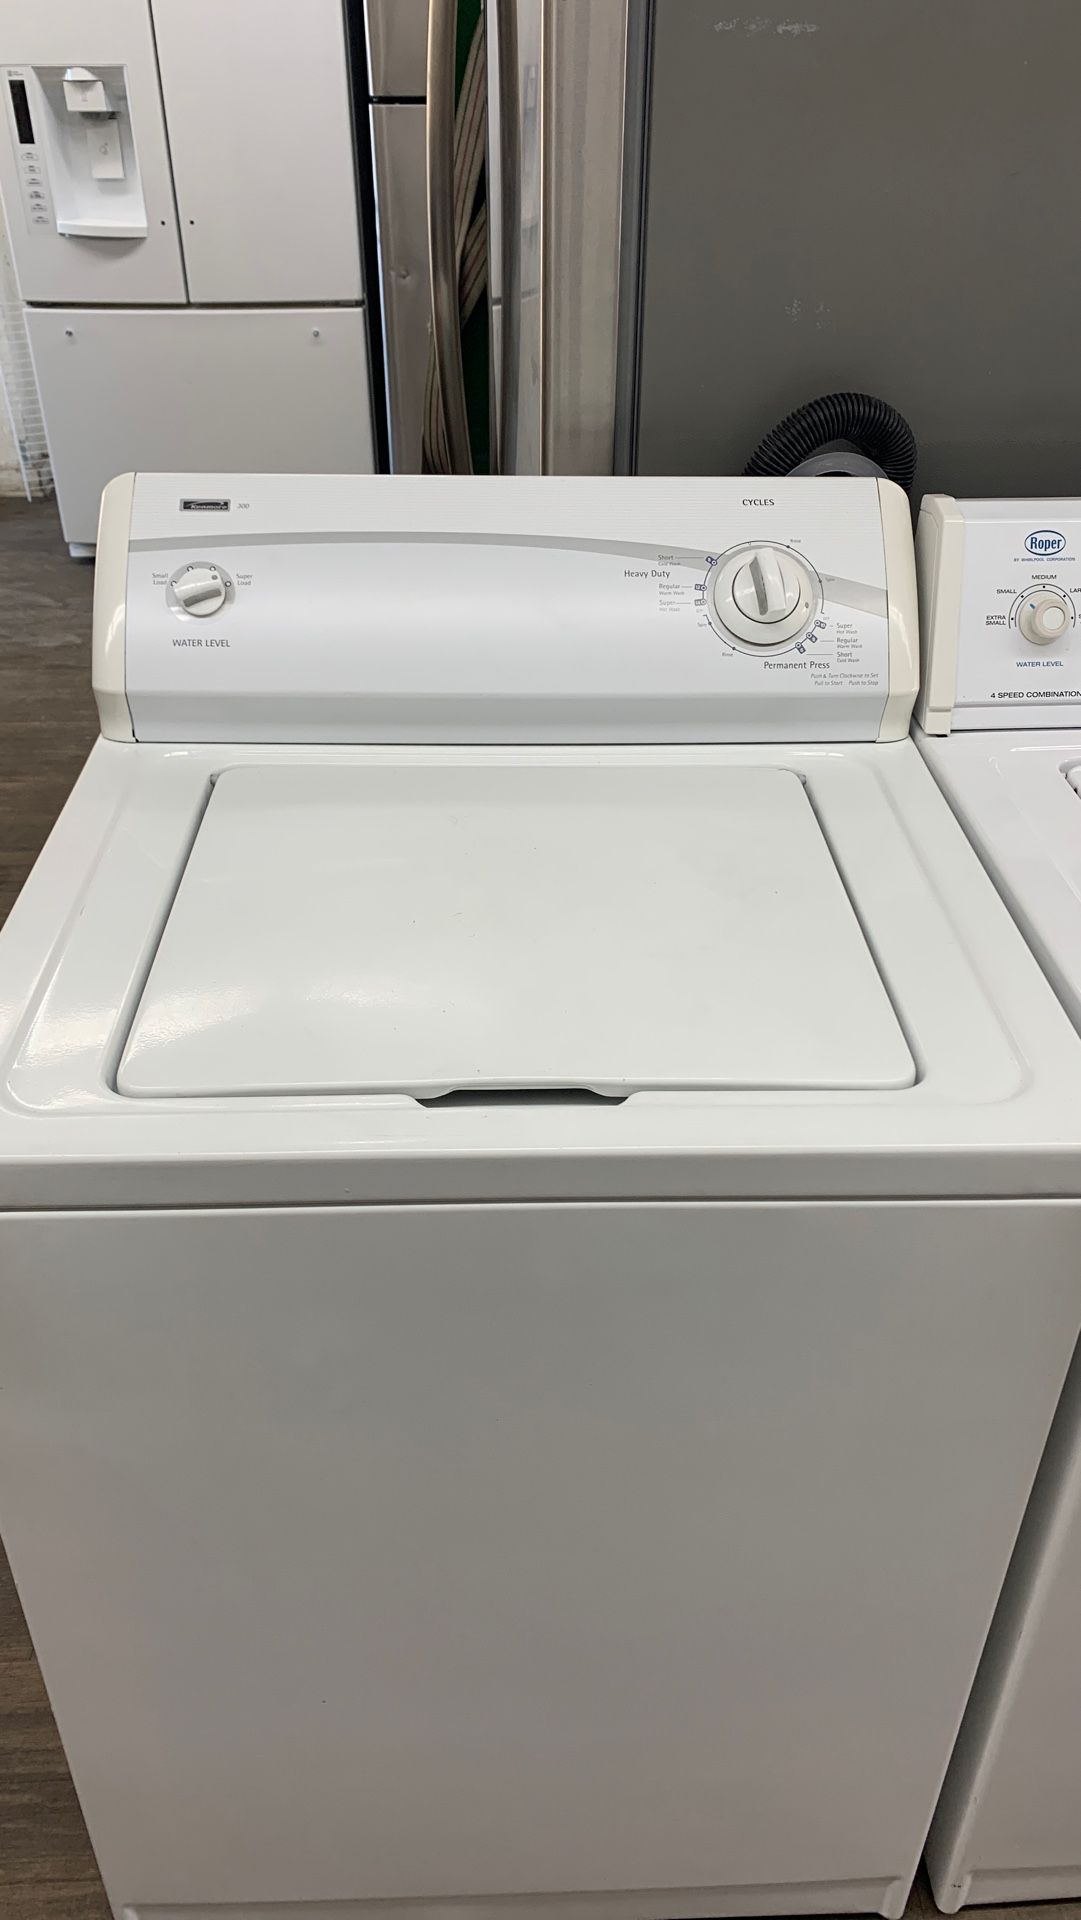 👔👔👔 KENMORE 300 TOP LOAD WASHER 👔👔👔